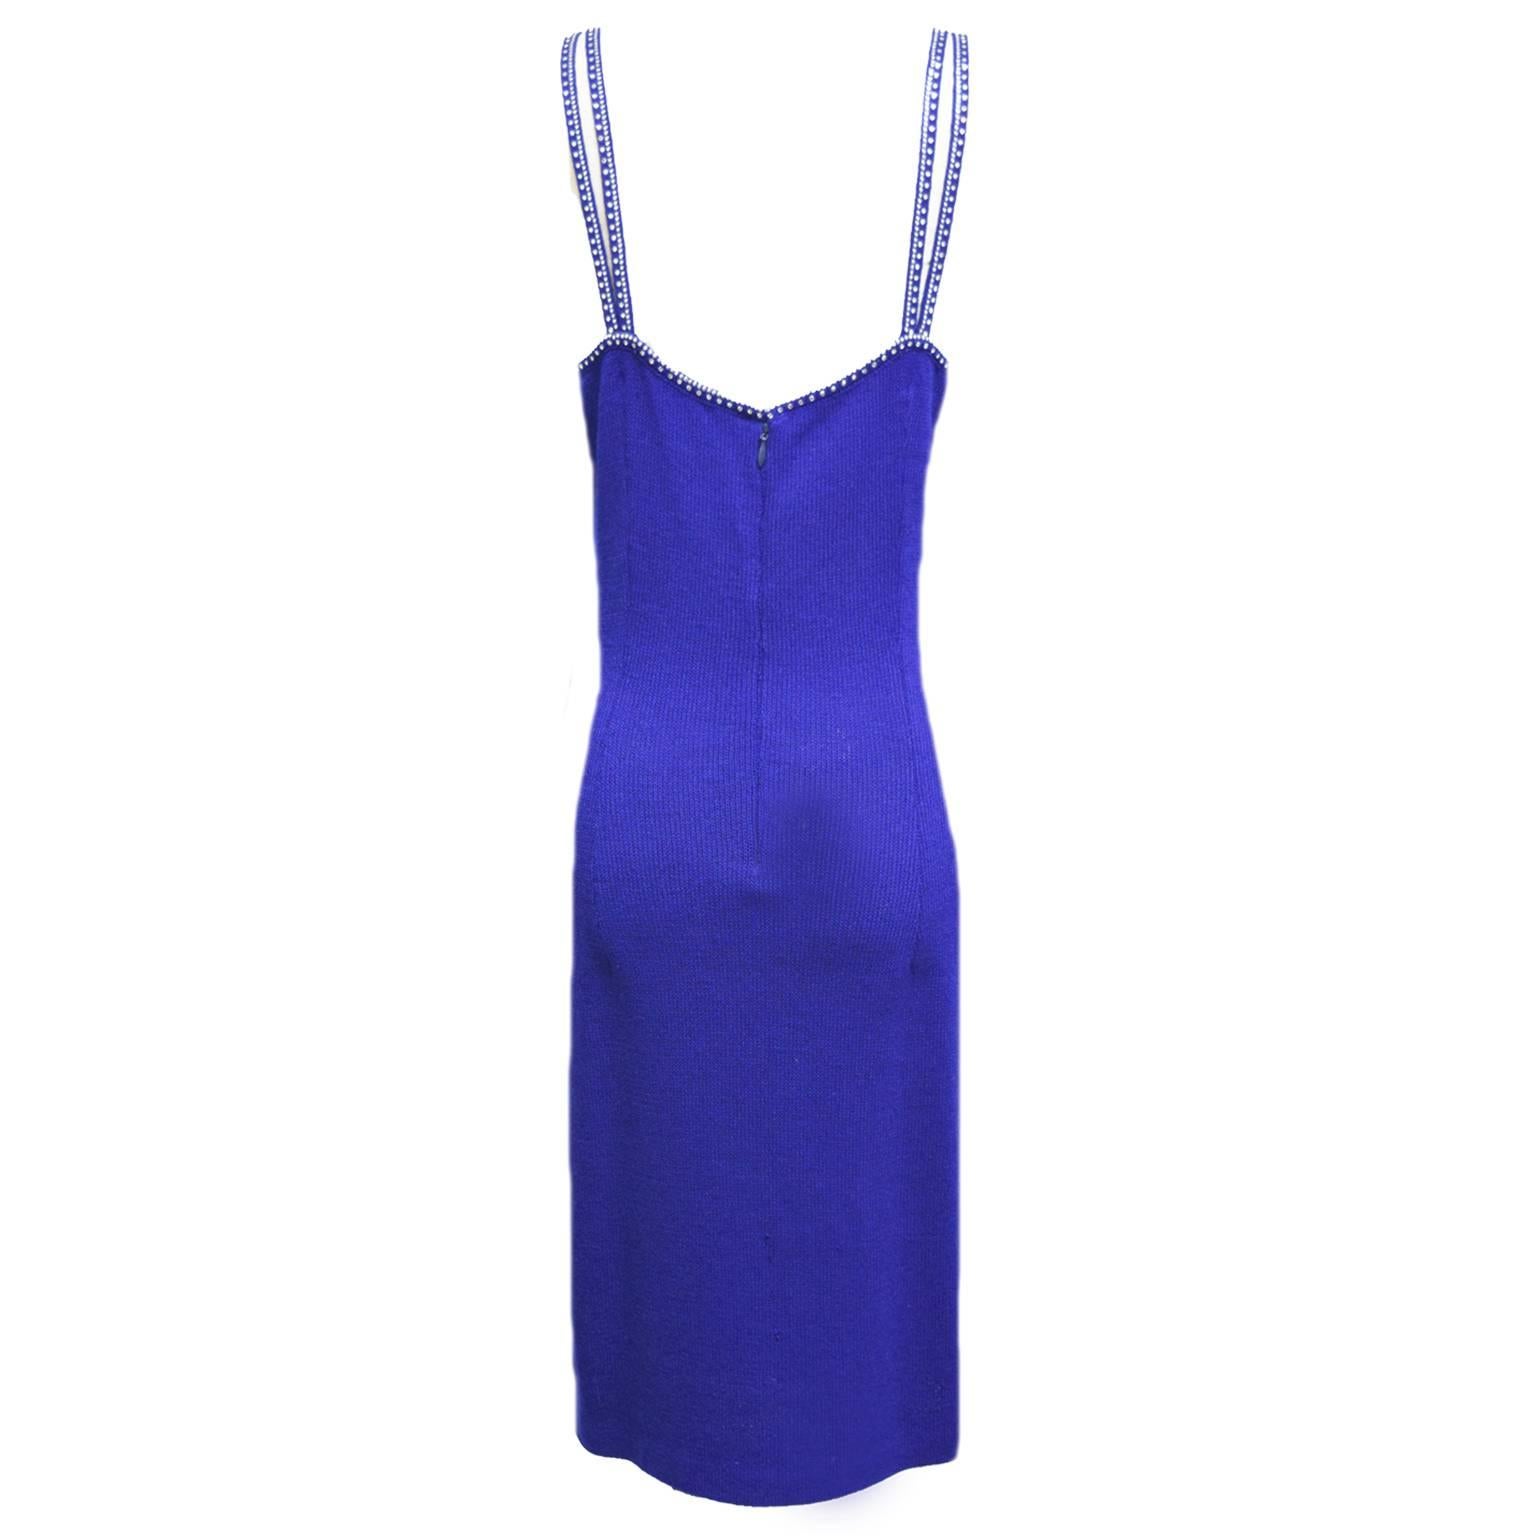 St. John evening wear is great for any night out. This bodycon dress is royal blue with two strapped upper and has a rhinestone boarder along the straps and neckline.   